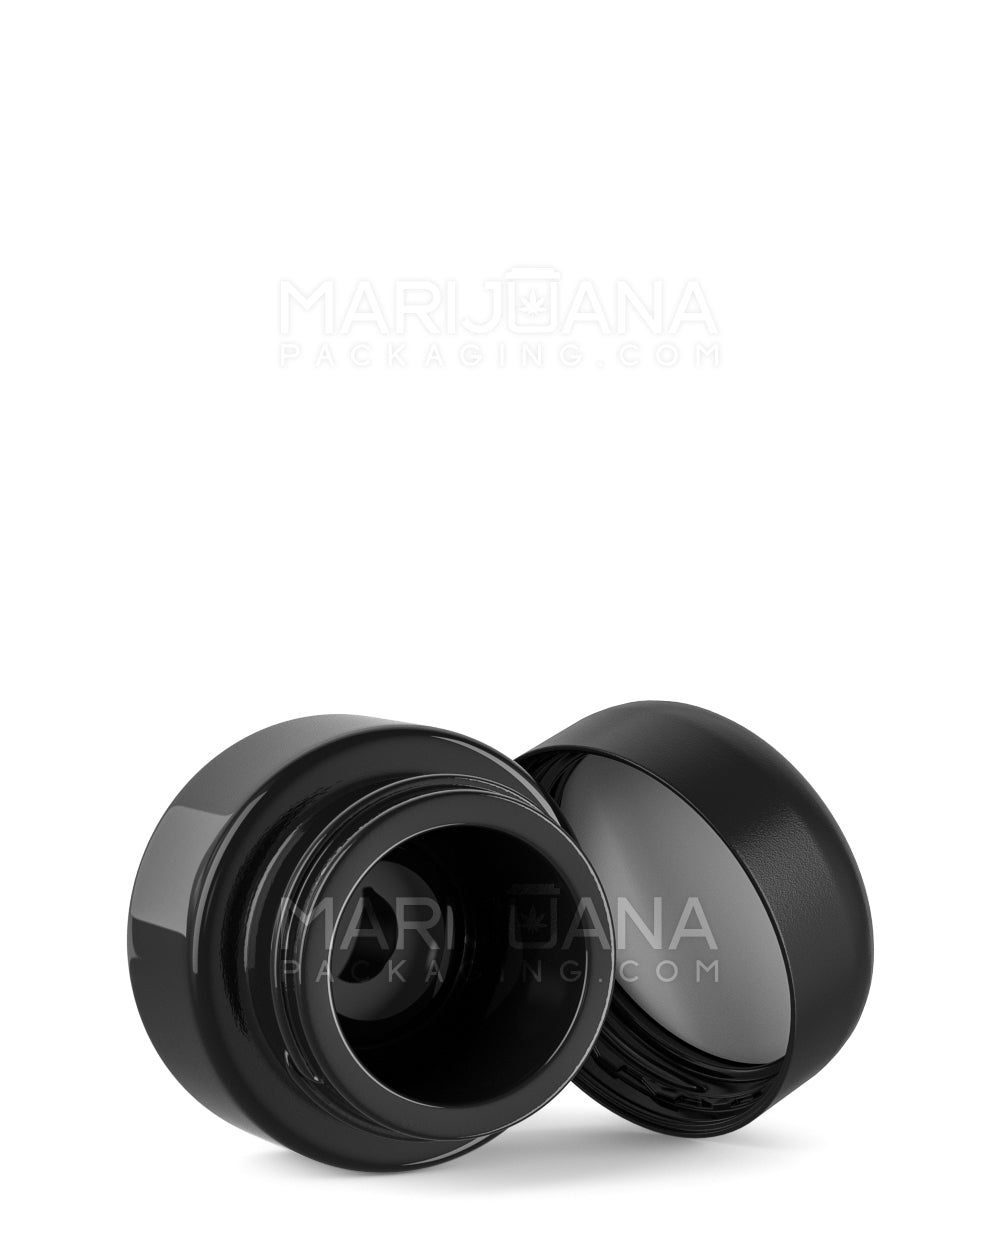 Child Resistant | Glossy Black Glass Concentrate Containers w/ Cap | 29mm - 5mL - 504 Count